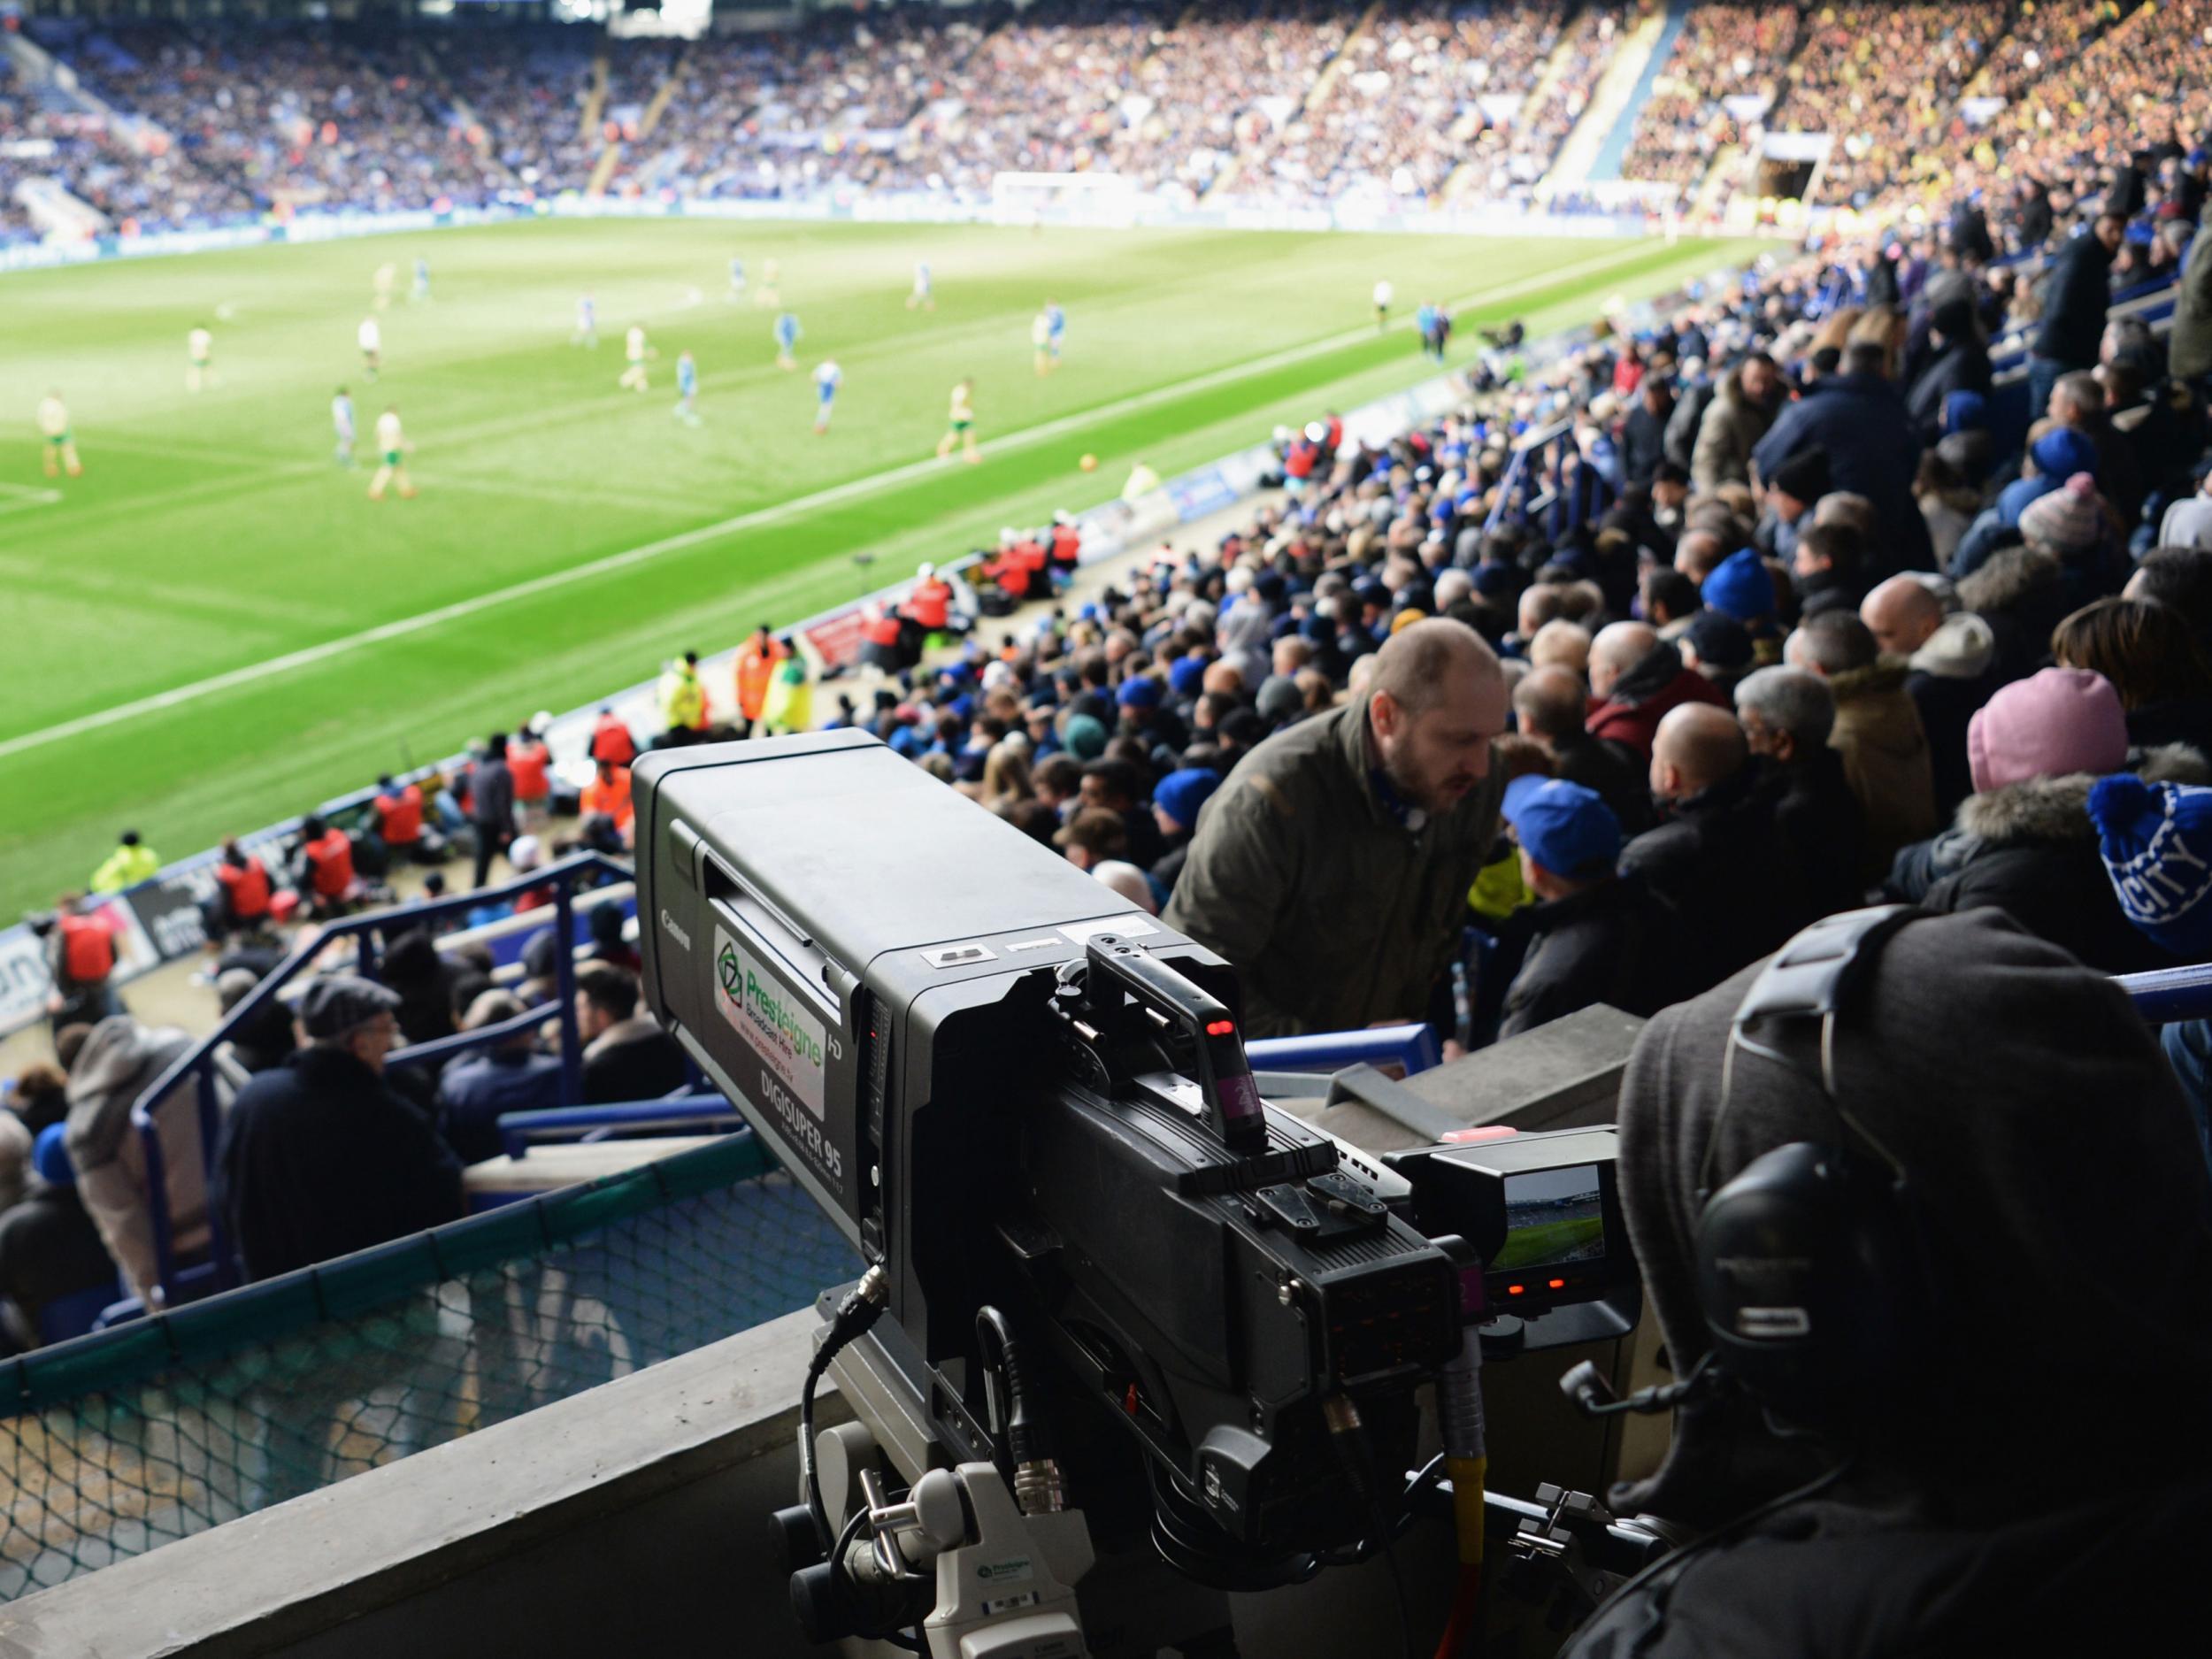 A camera takes in a Premier League game, broadcasting it live around the world